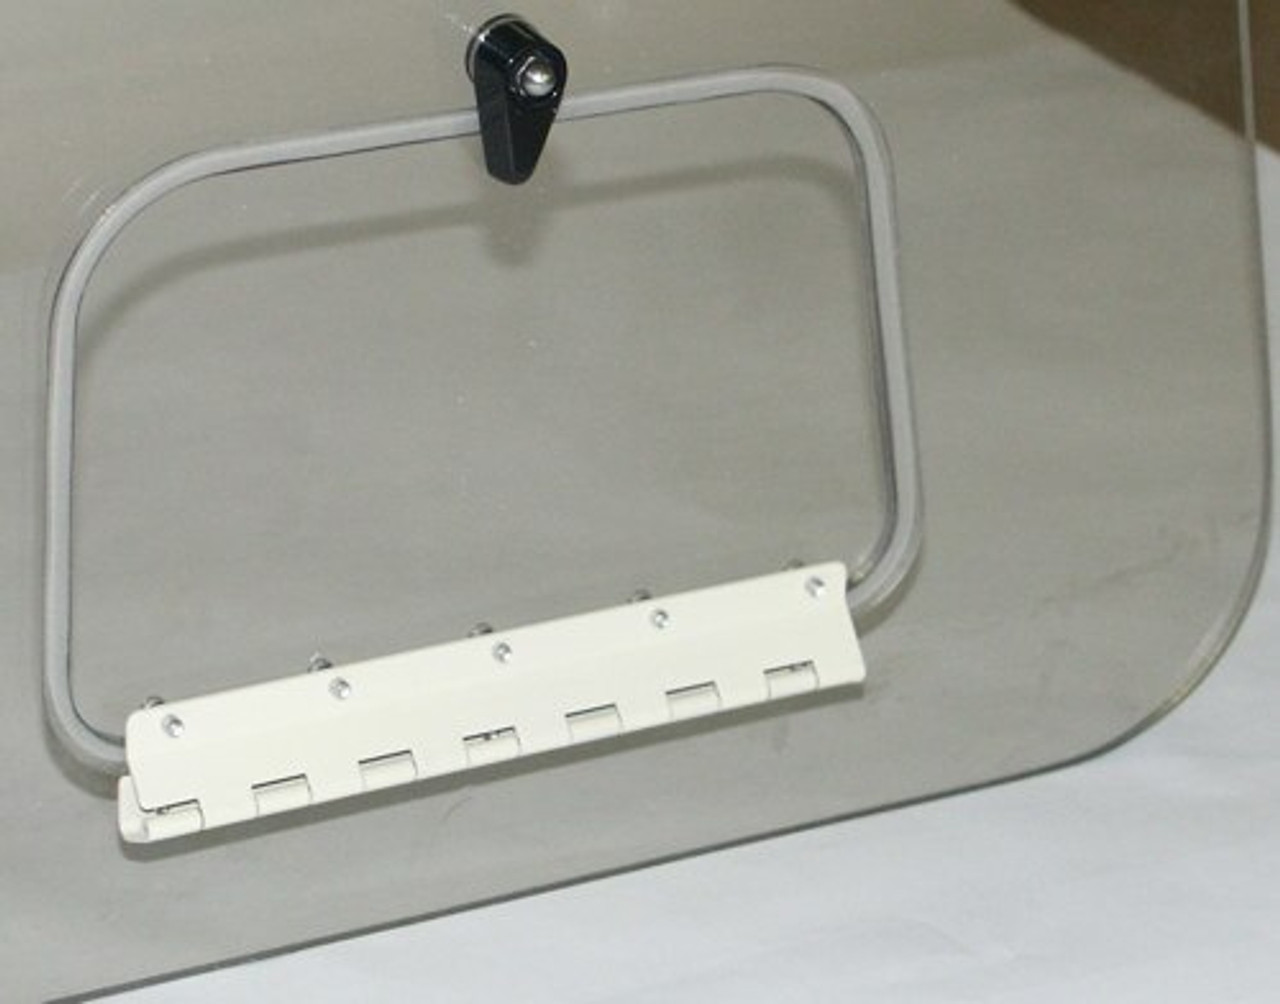 2315 - PA-23-250 Vent window assembly detail